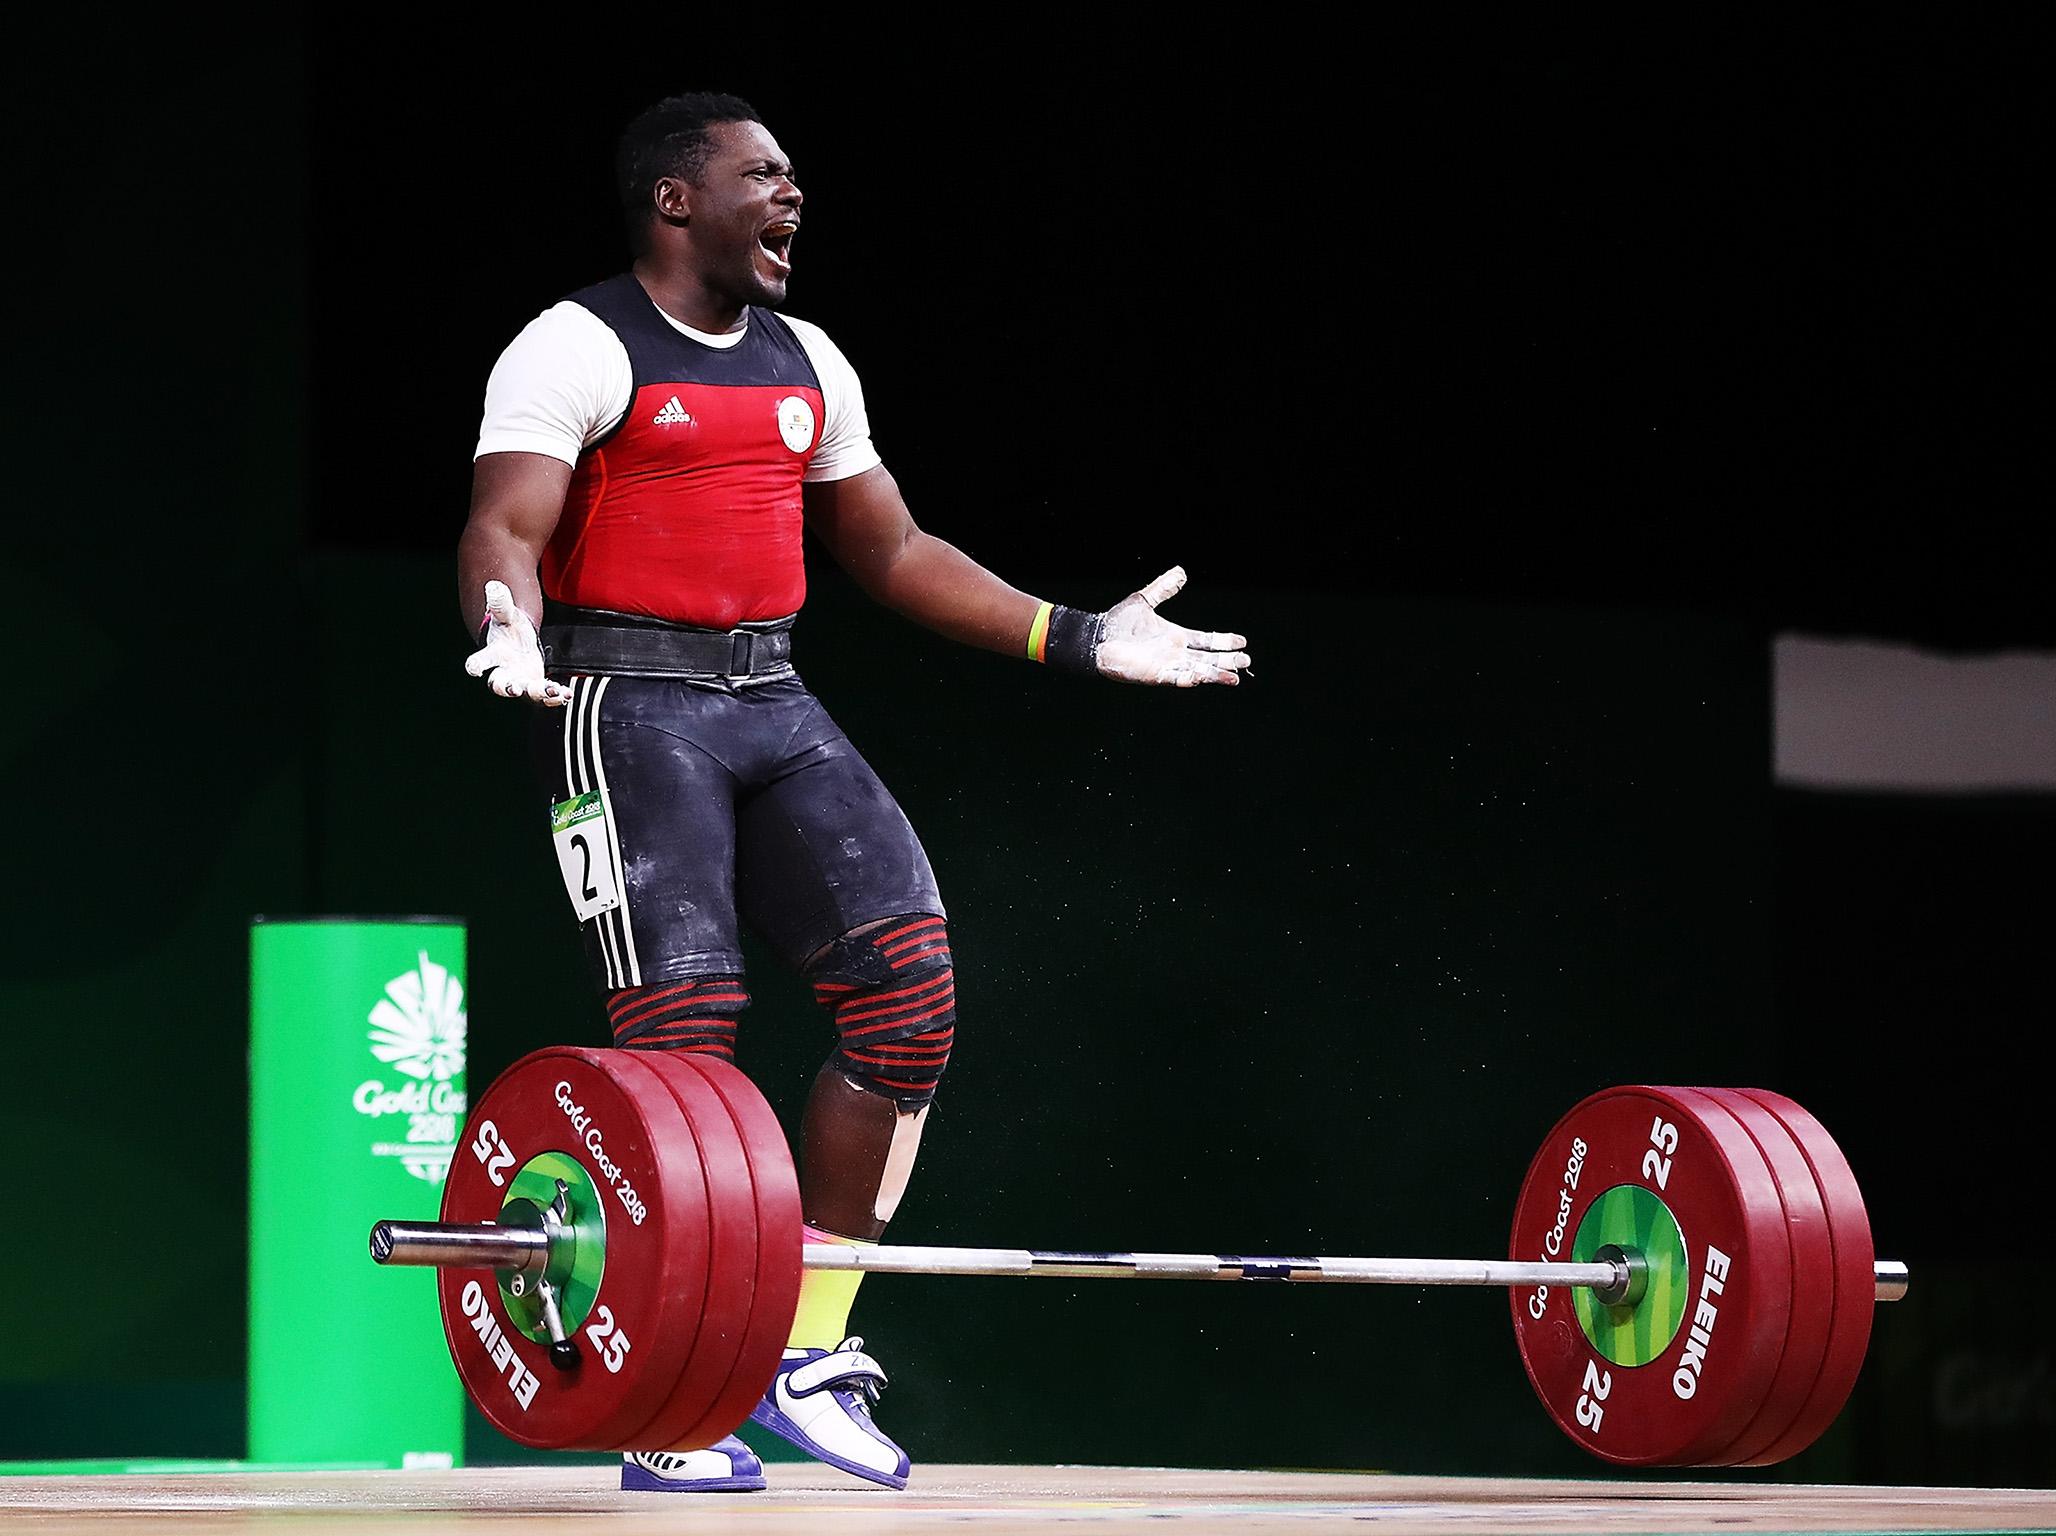 Petit David Minkoumba competed in the 94kg final but is now missing